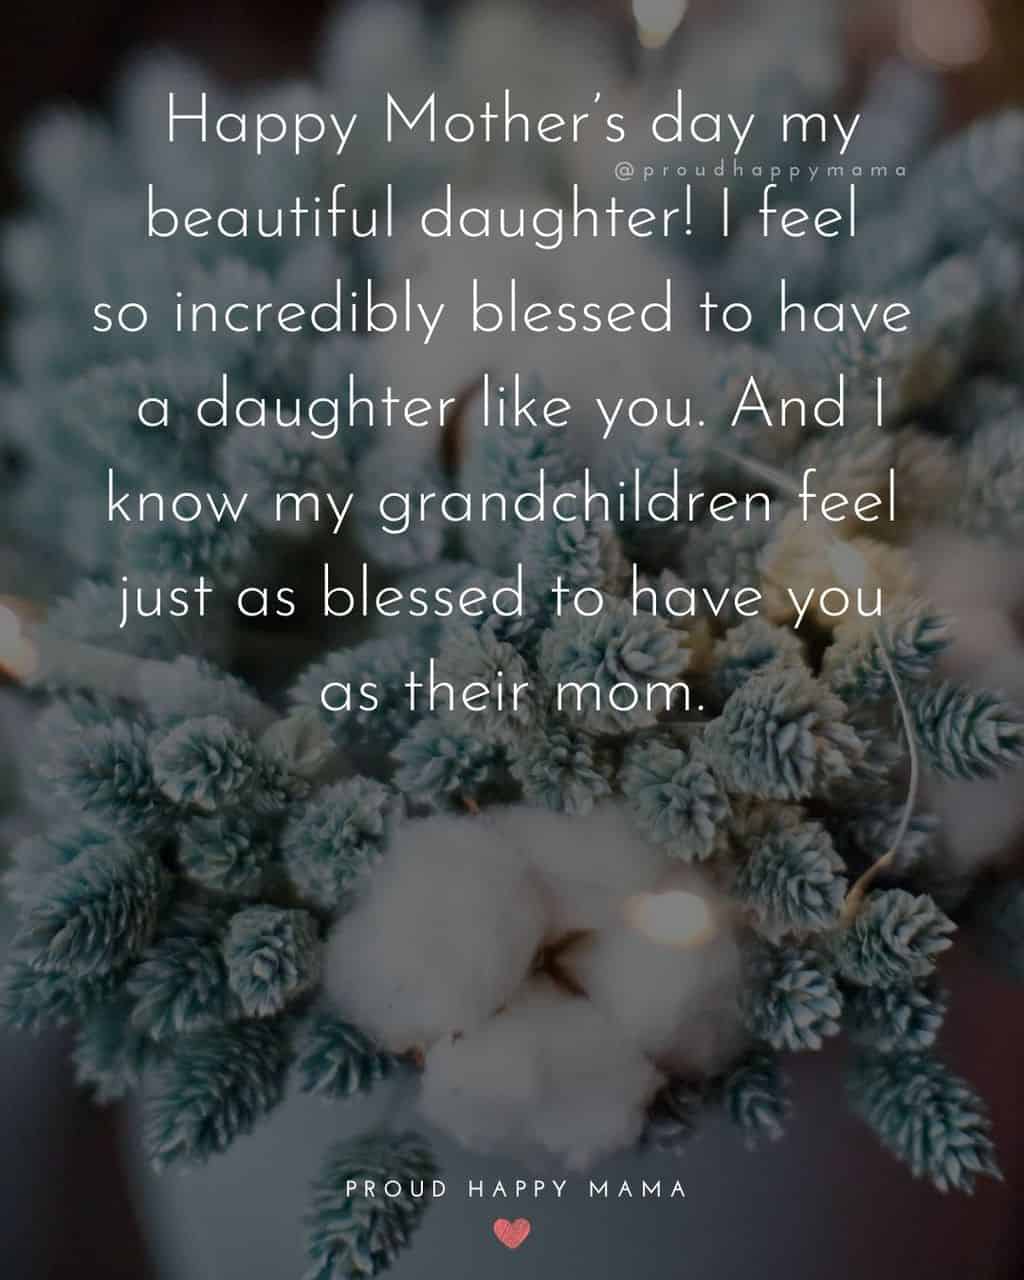 Happy Mothers Day Quotes To Daughter - Happy Mother’s day my beautiful daughter! I feel so incredibly blessed to have a daughter like